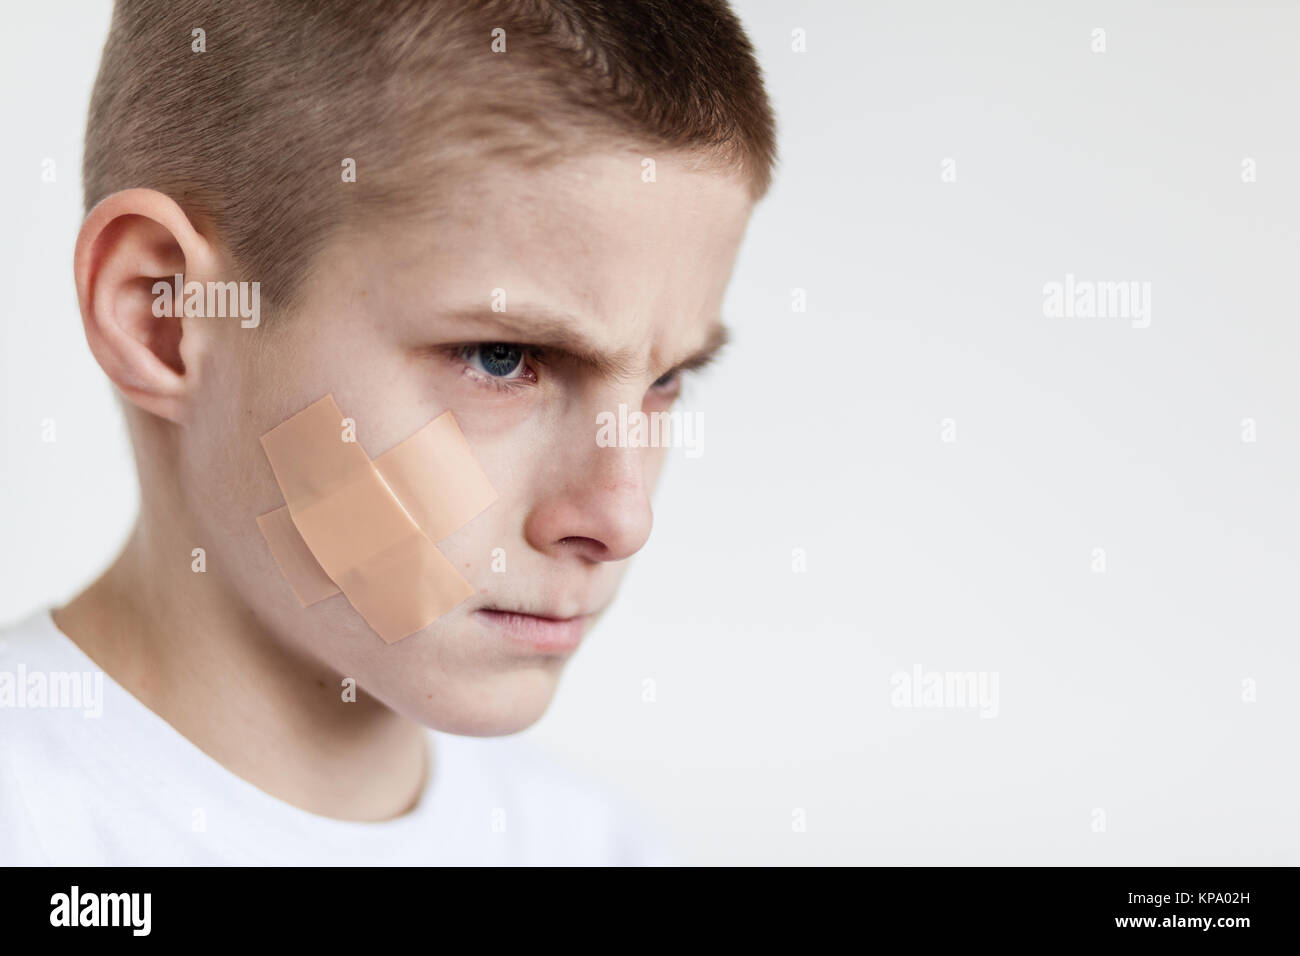 Angry Boy with Bandage on Face Looking to Distance Stock Photo